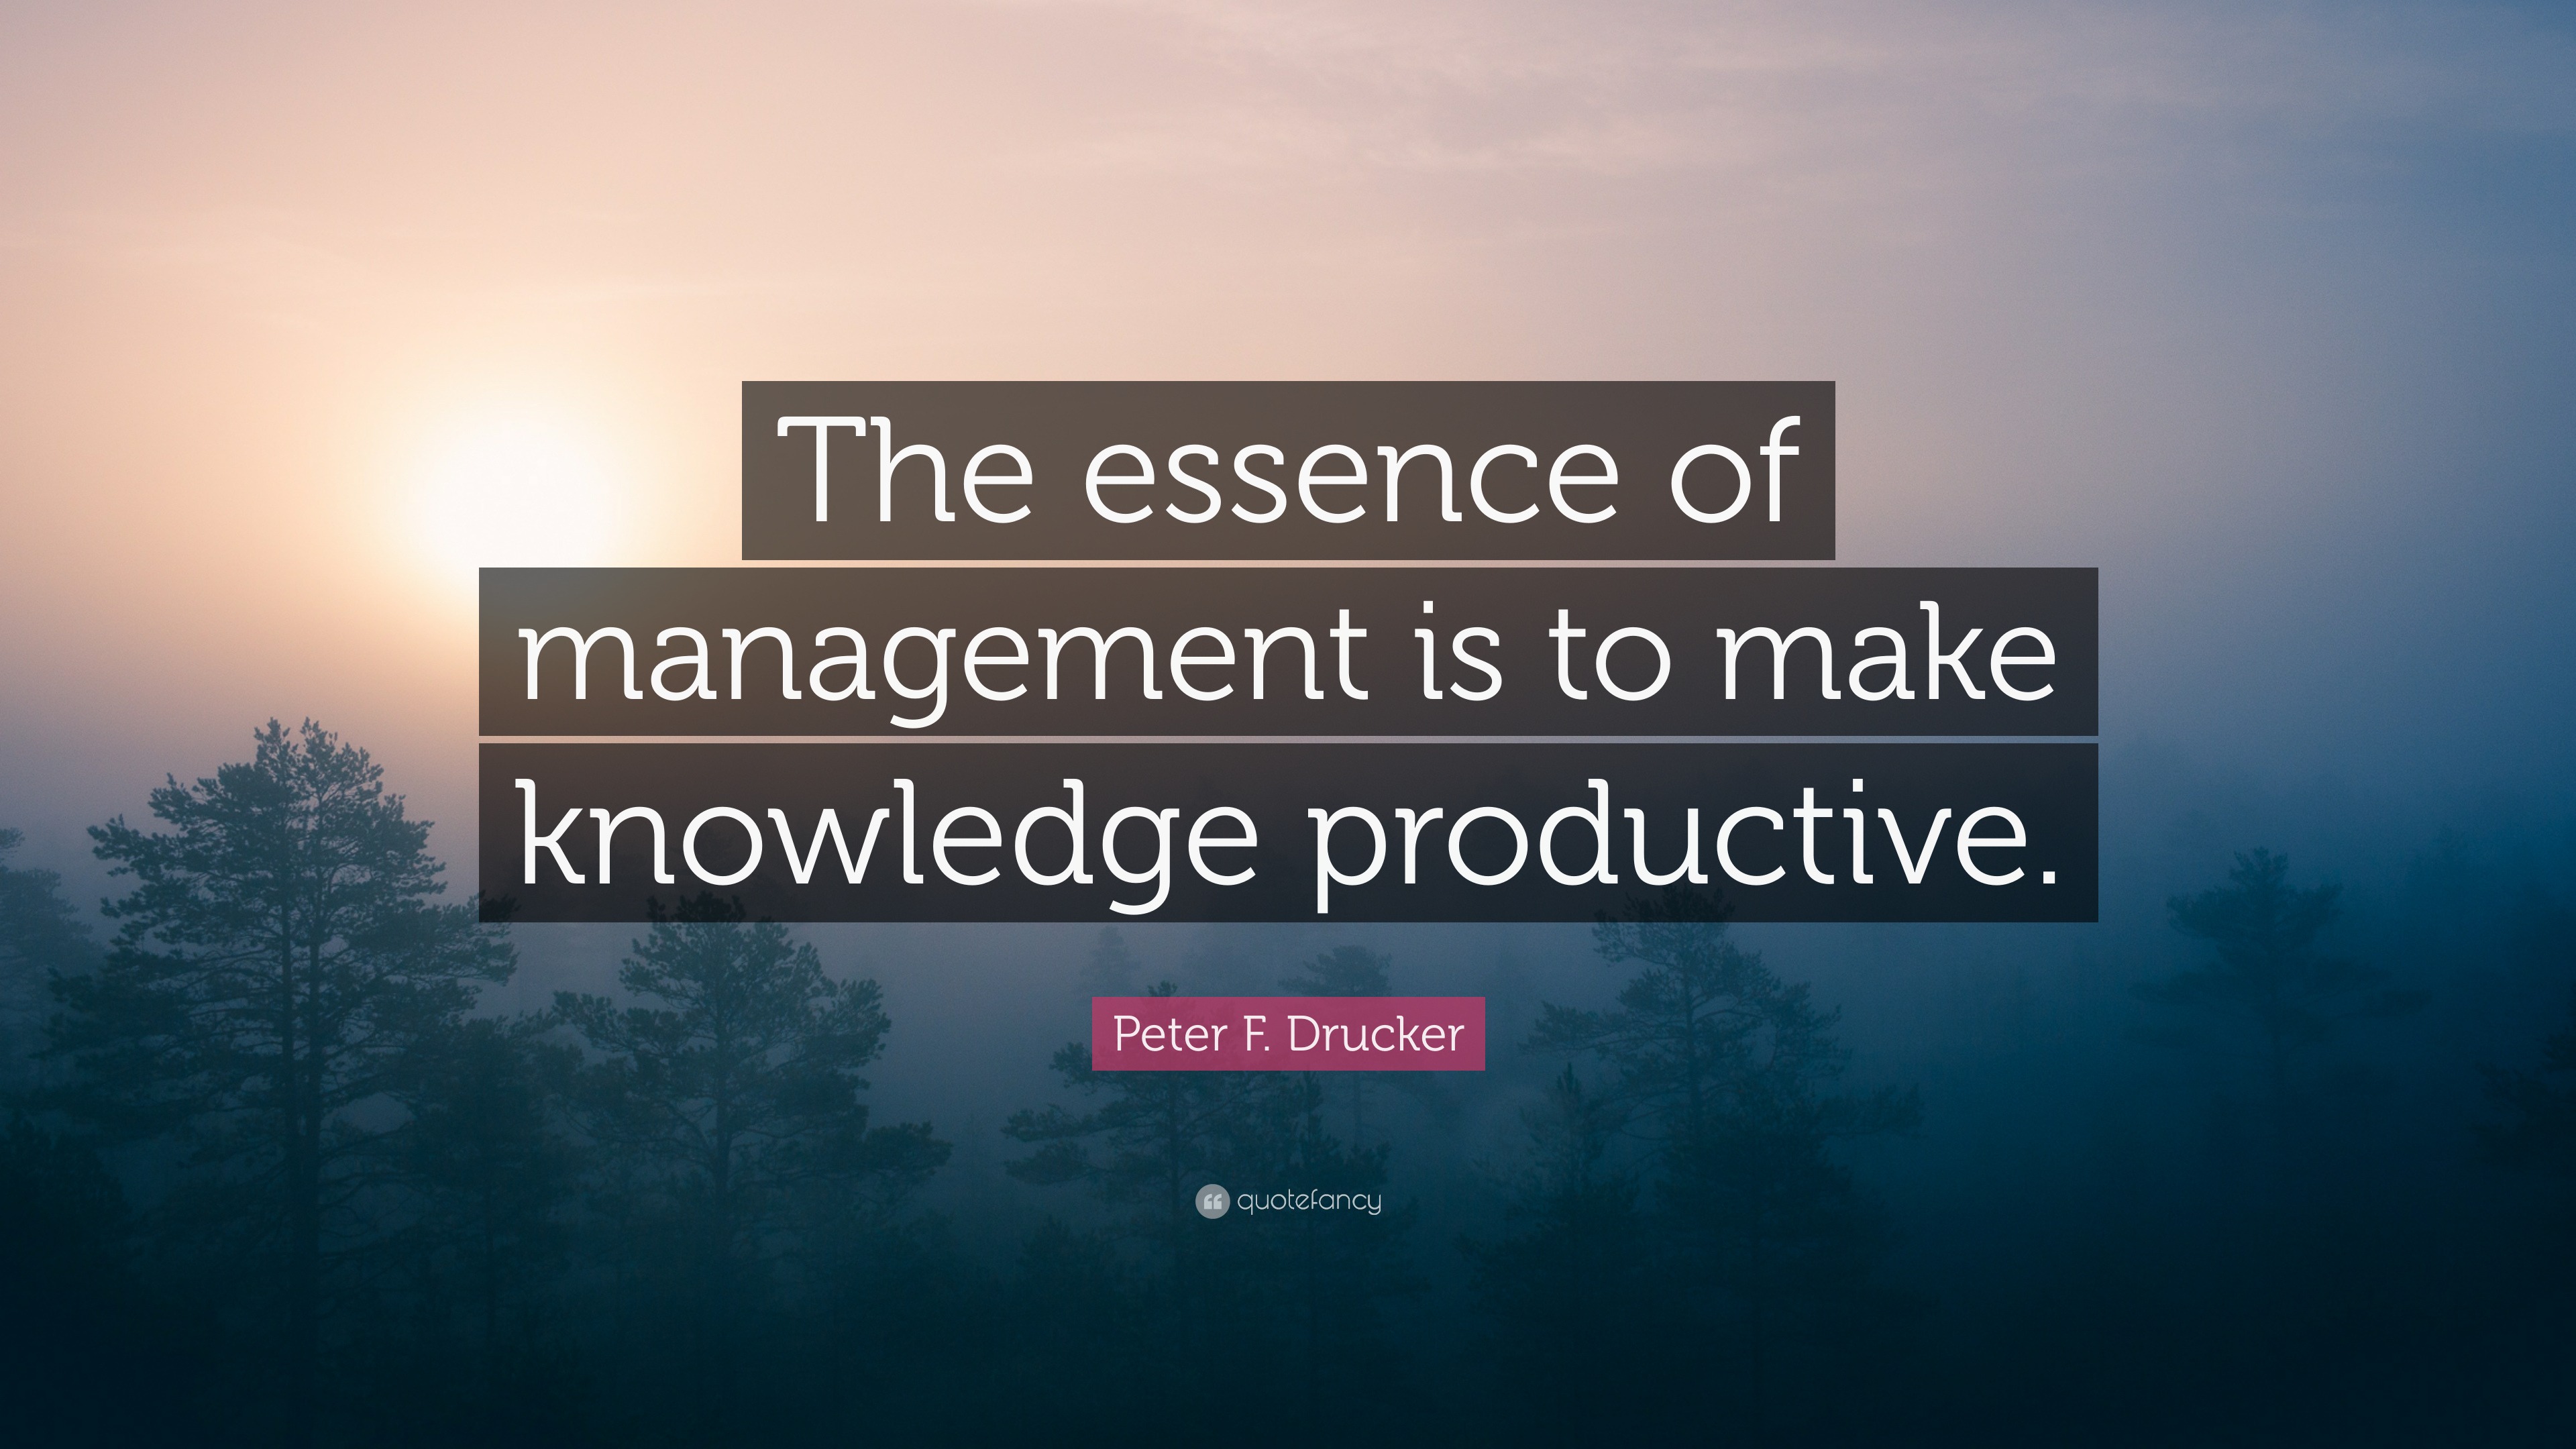 Peter F. Drucker Quote: “The essence of management is to make knowledge